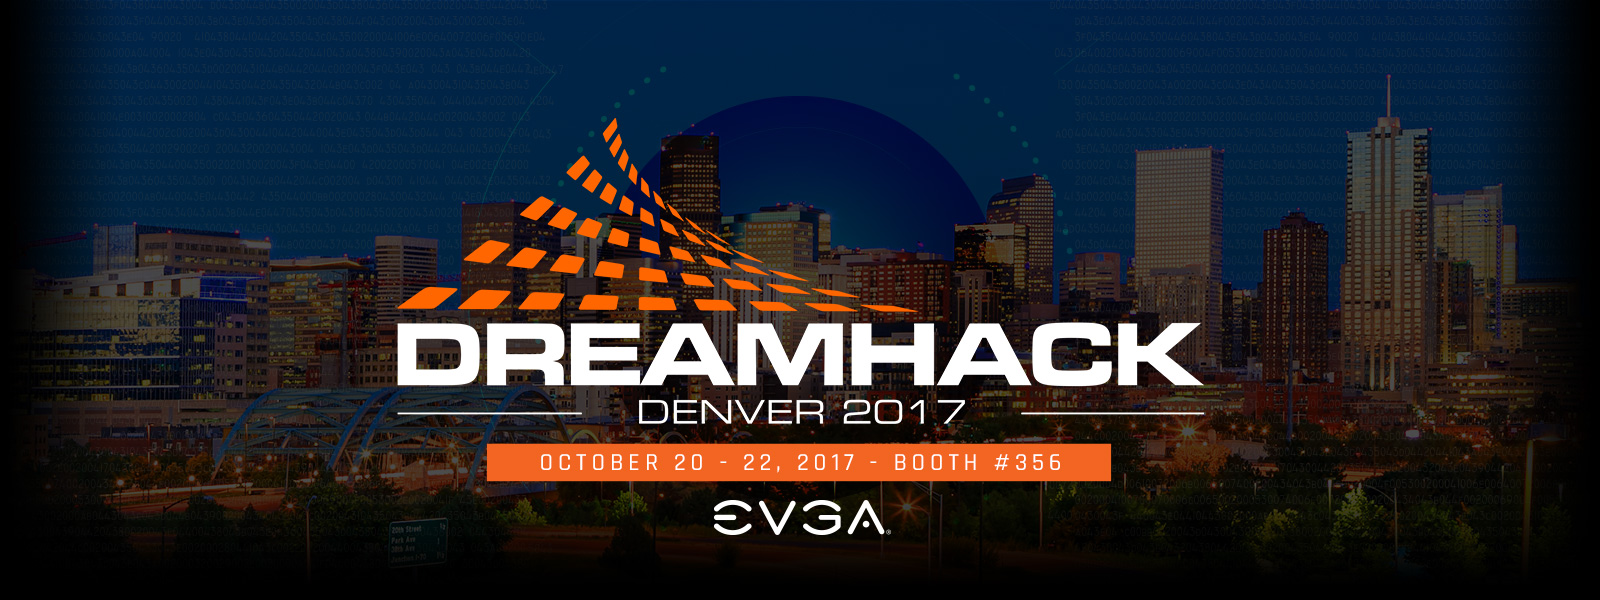 Join or Watch EVGA at Dreamhack Denver 2017!